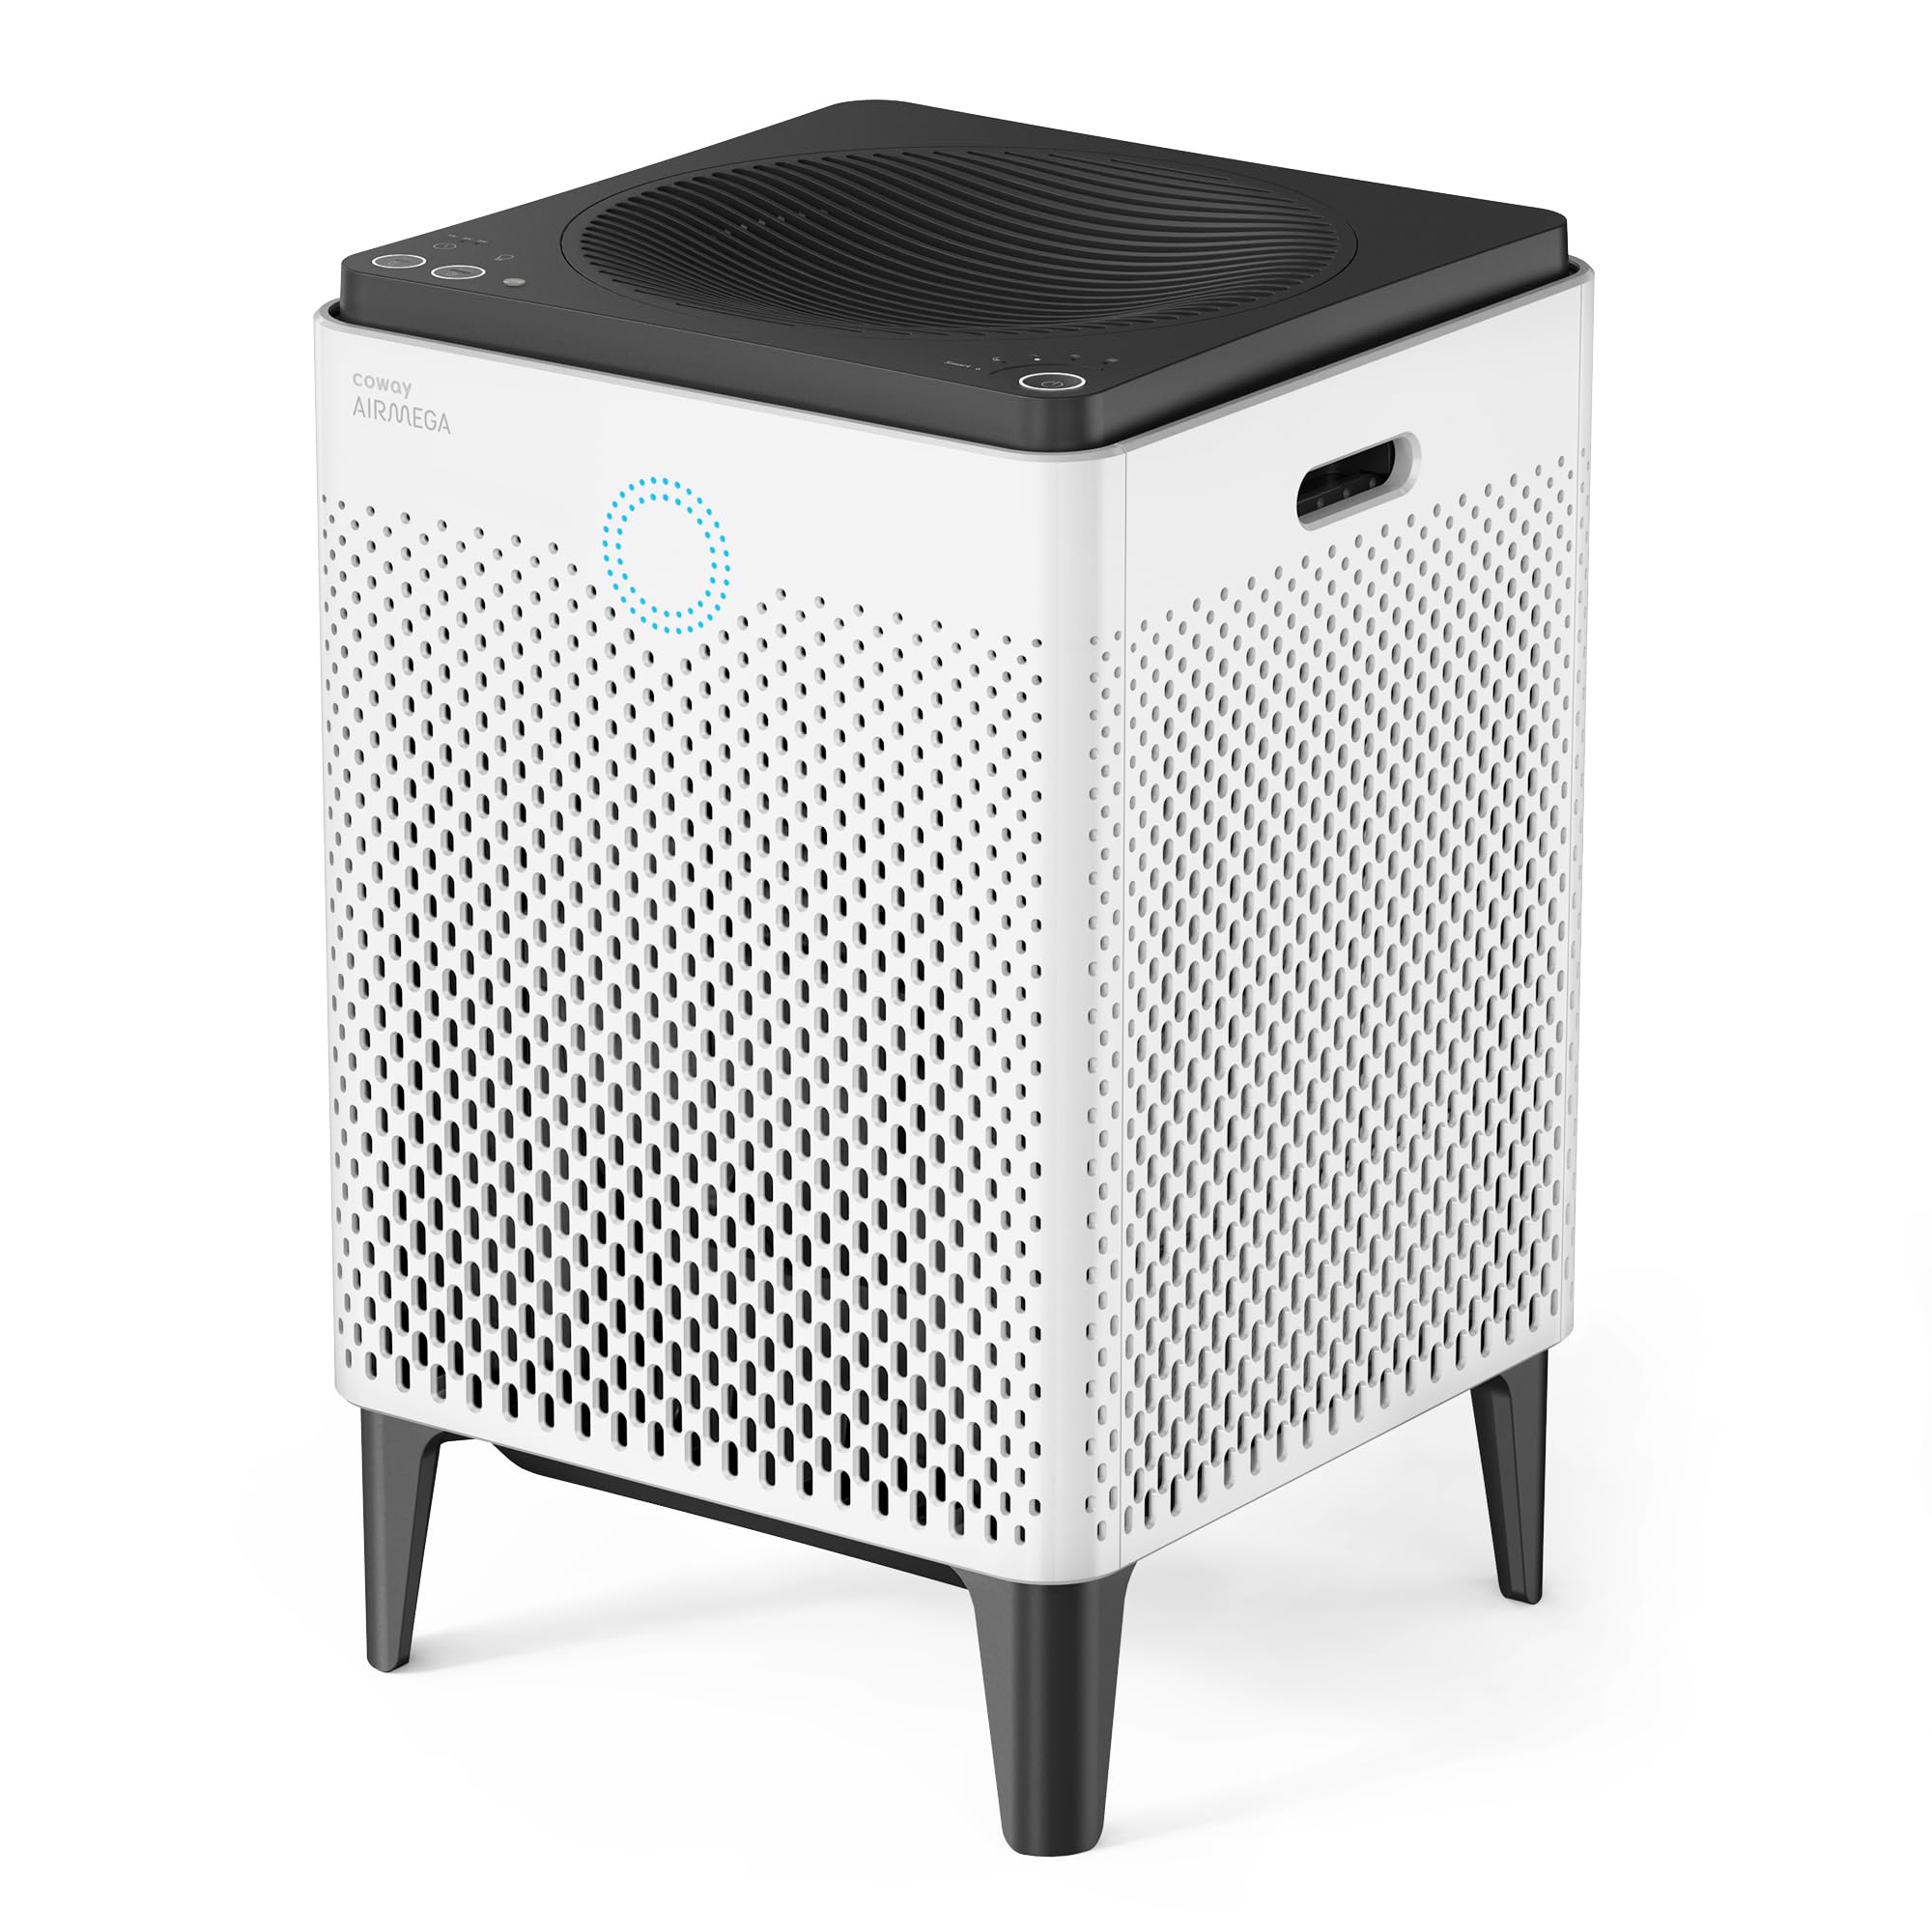 Coway Airmega 400 True HEPA Air Purifier with Smart Technology, Covers 1,560 sq. ft, White $369.99